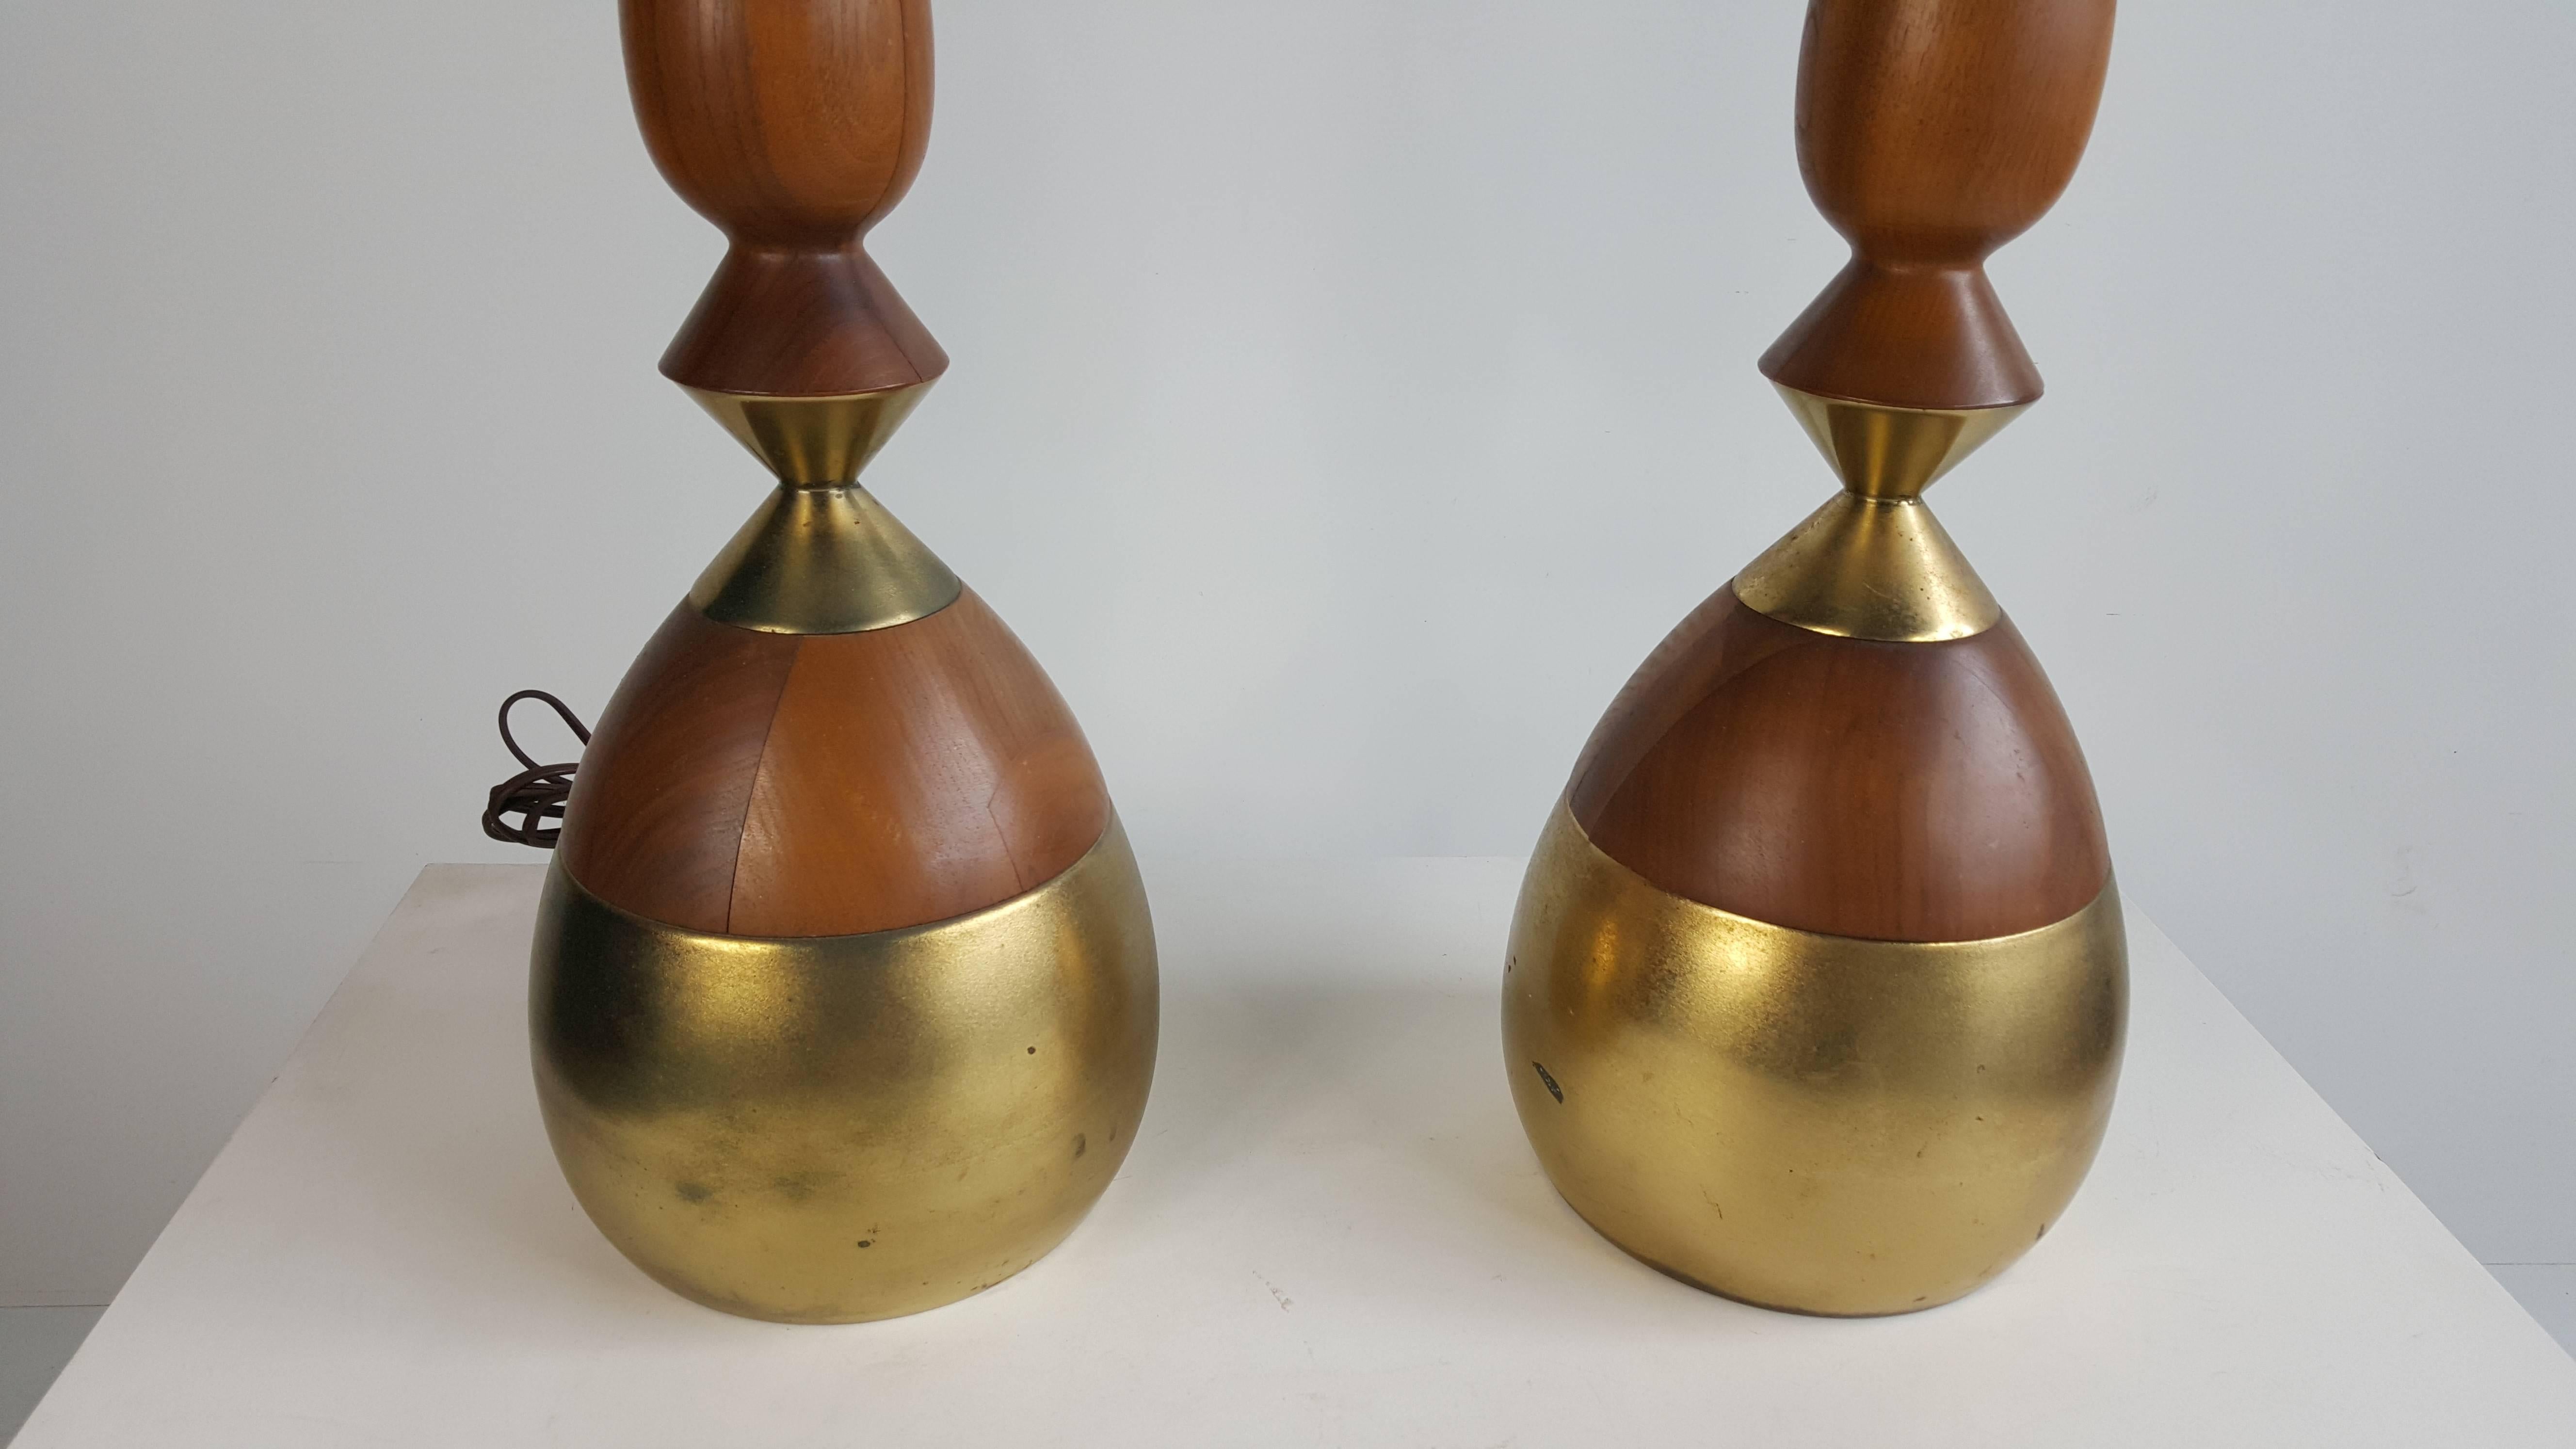 Classic pair of Mid-Century Modern table lamps designed by Tony Paul. Turned walnut and brass, Fit seamlessly into any environment, minor separation to wood, hardly noticeable.